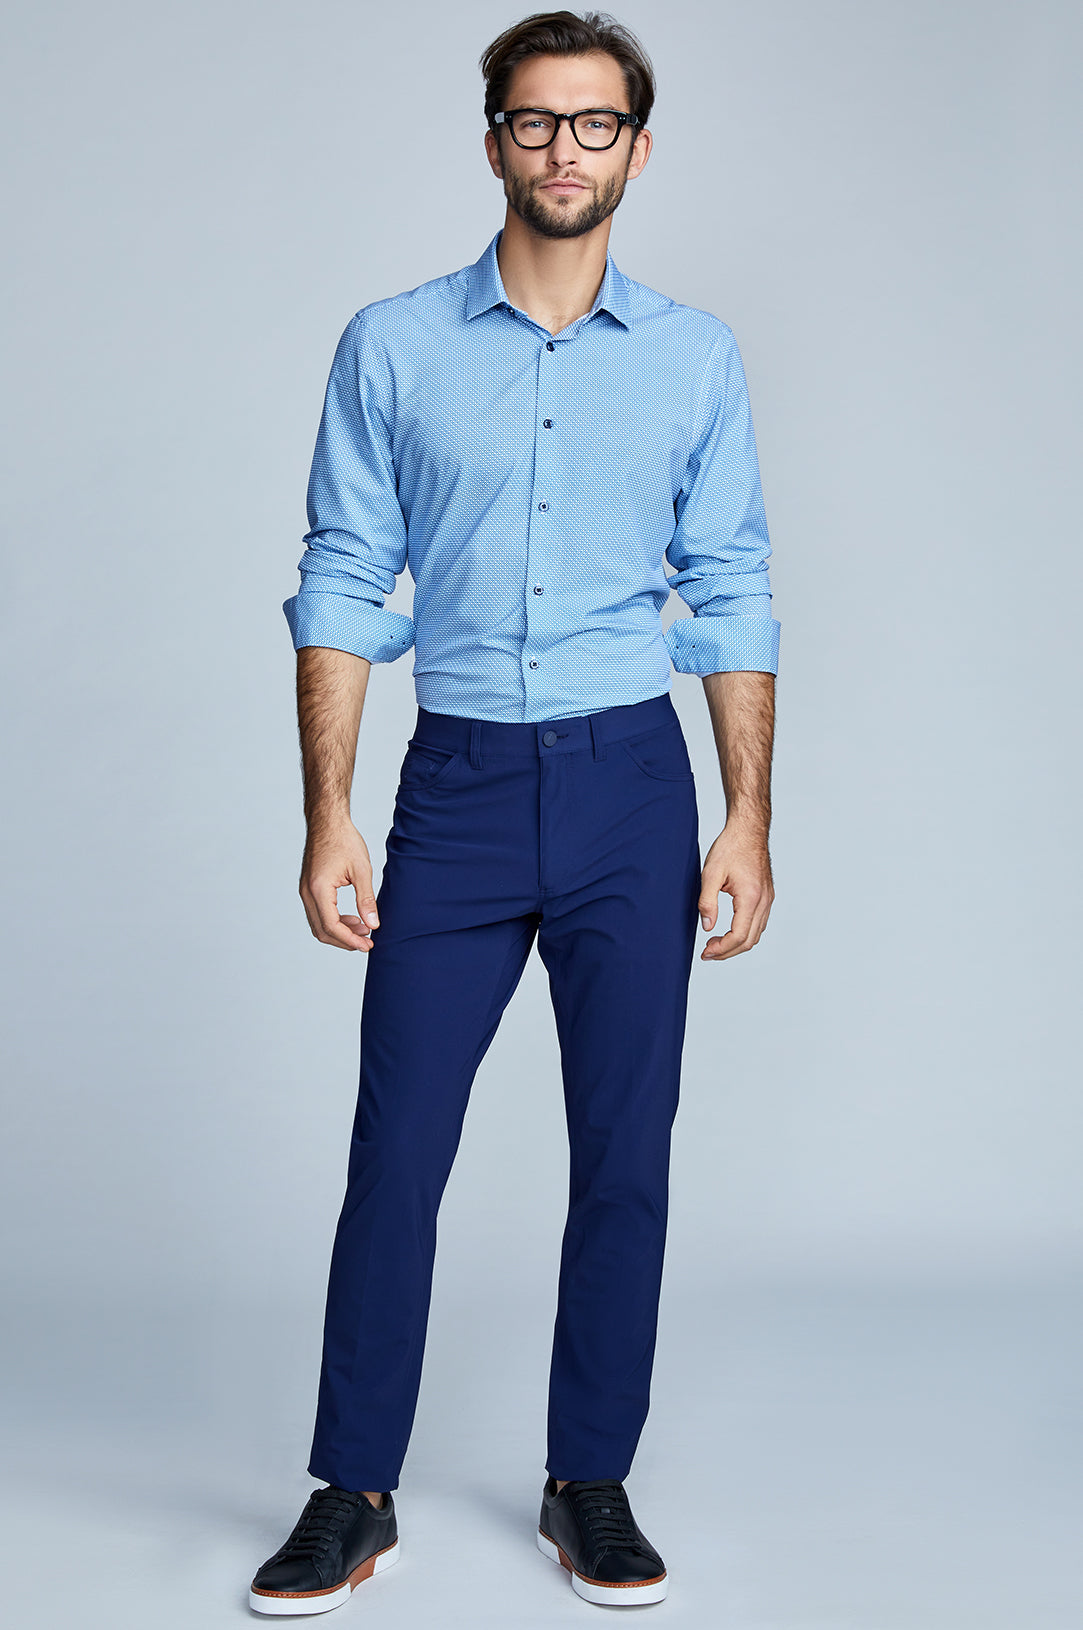 Can I wear a light blue dress shirt with blue pants? This is for an  interview with a large tech company (casual / business casual wear), with  British tan belt and shoes